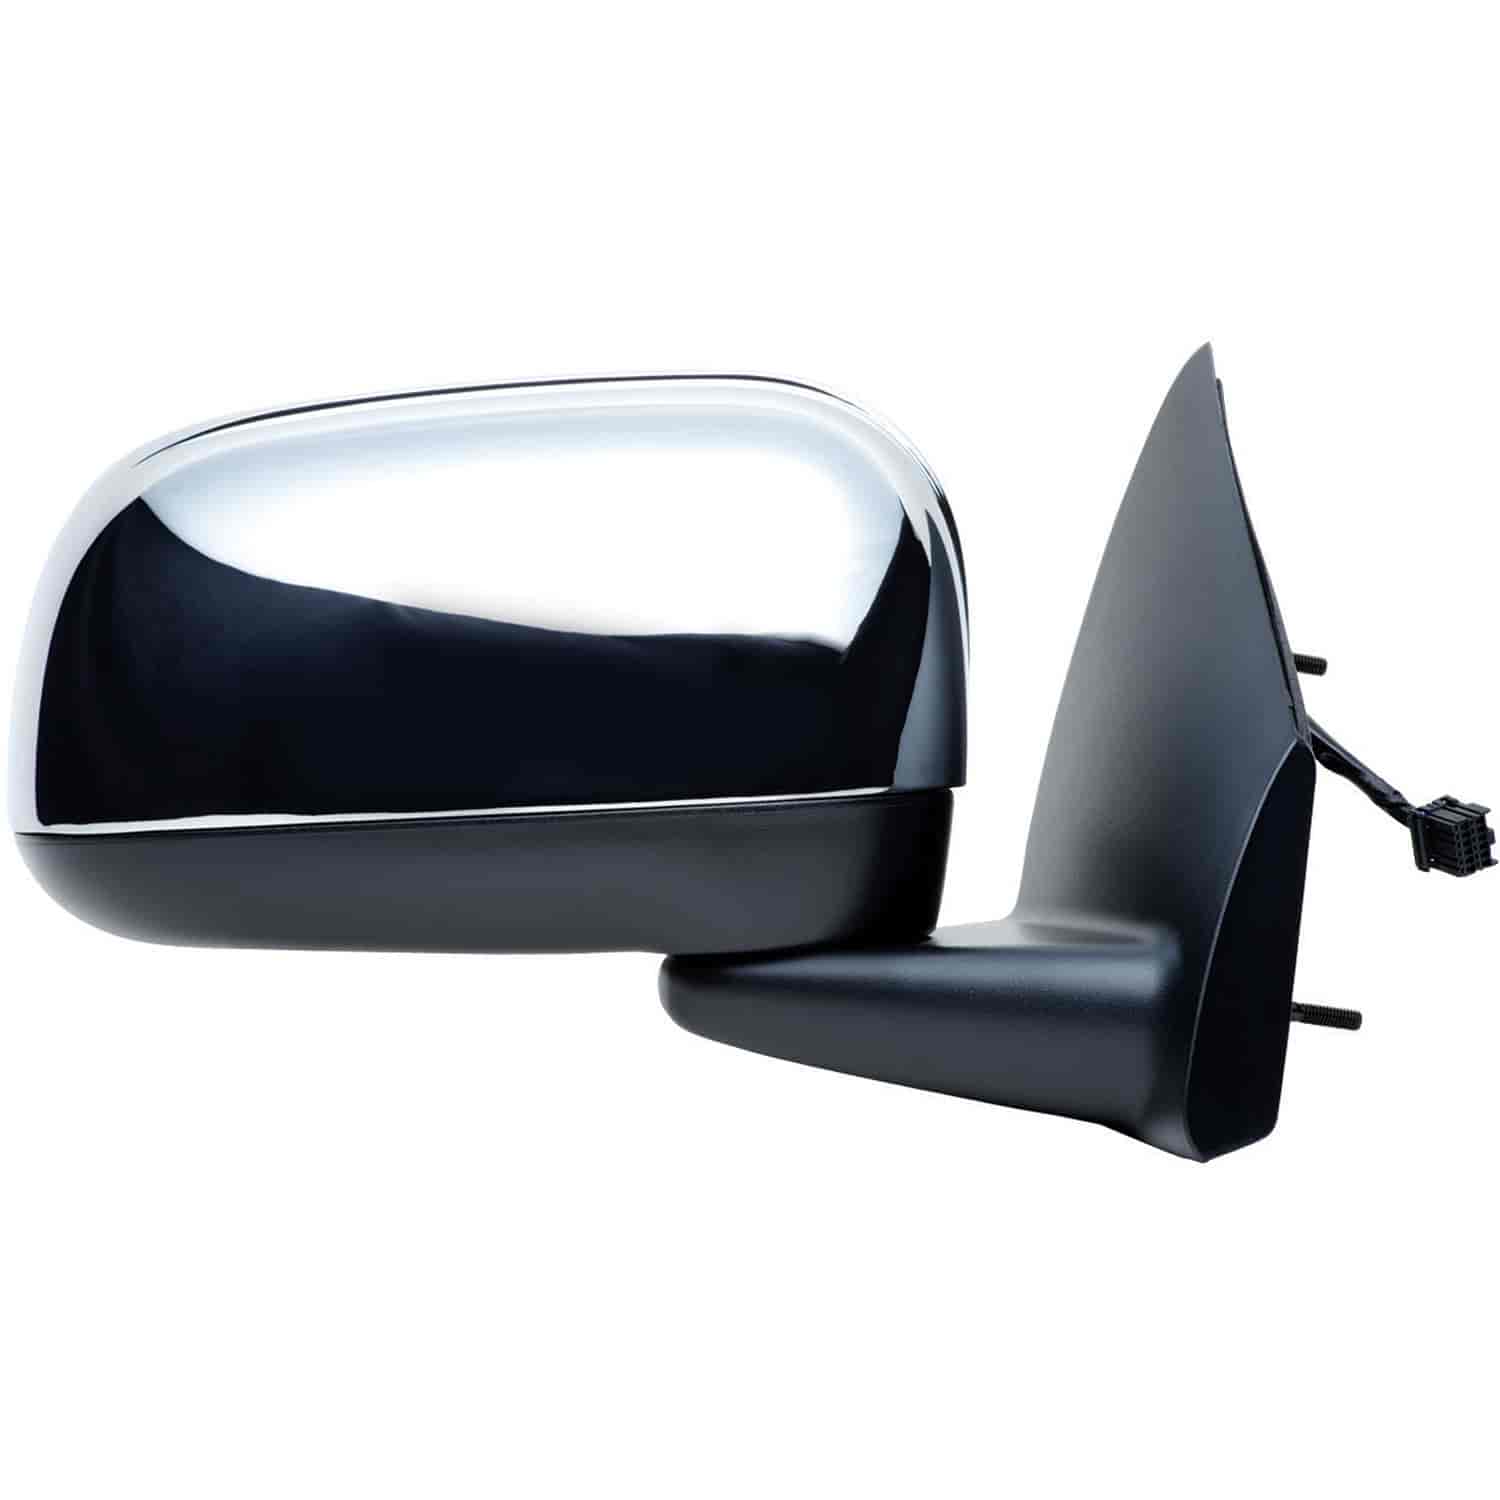 OEM Style Replacement mirror for 07-09 Chrysler Aspen